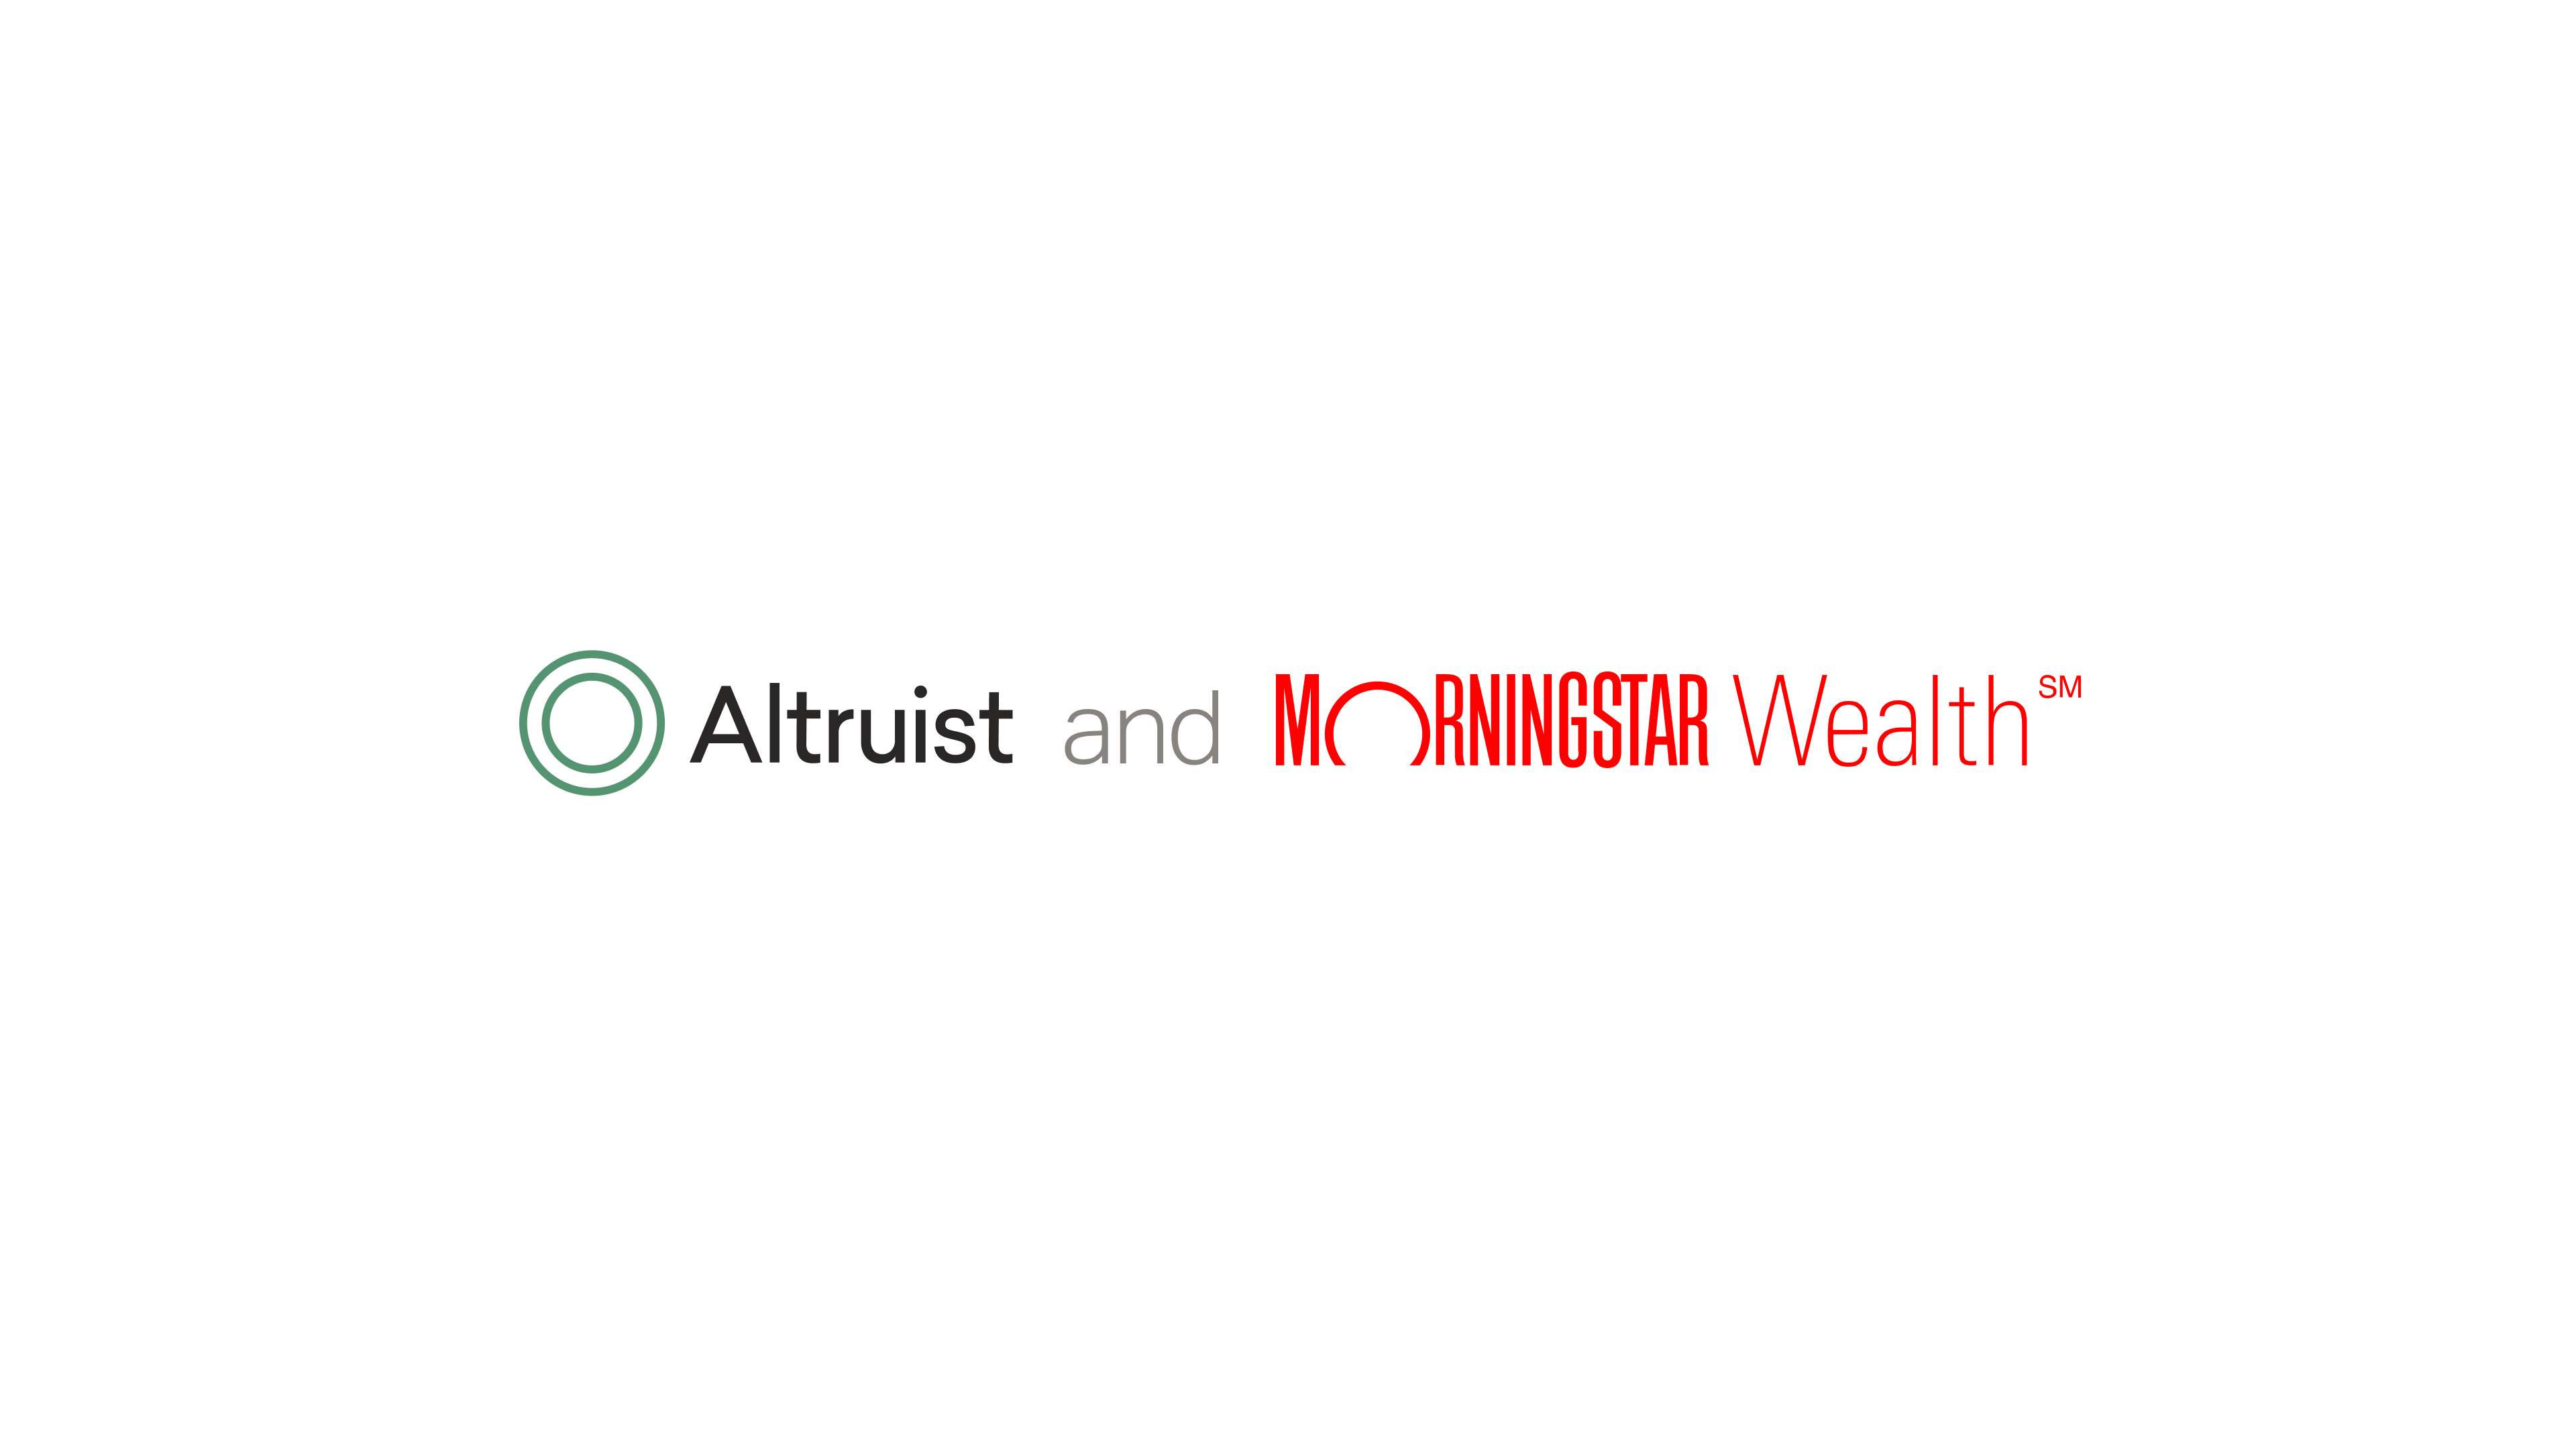 Altruist and Morningstar Wealth